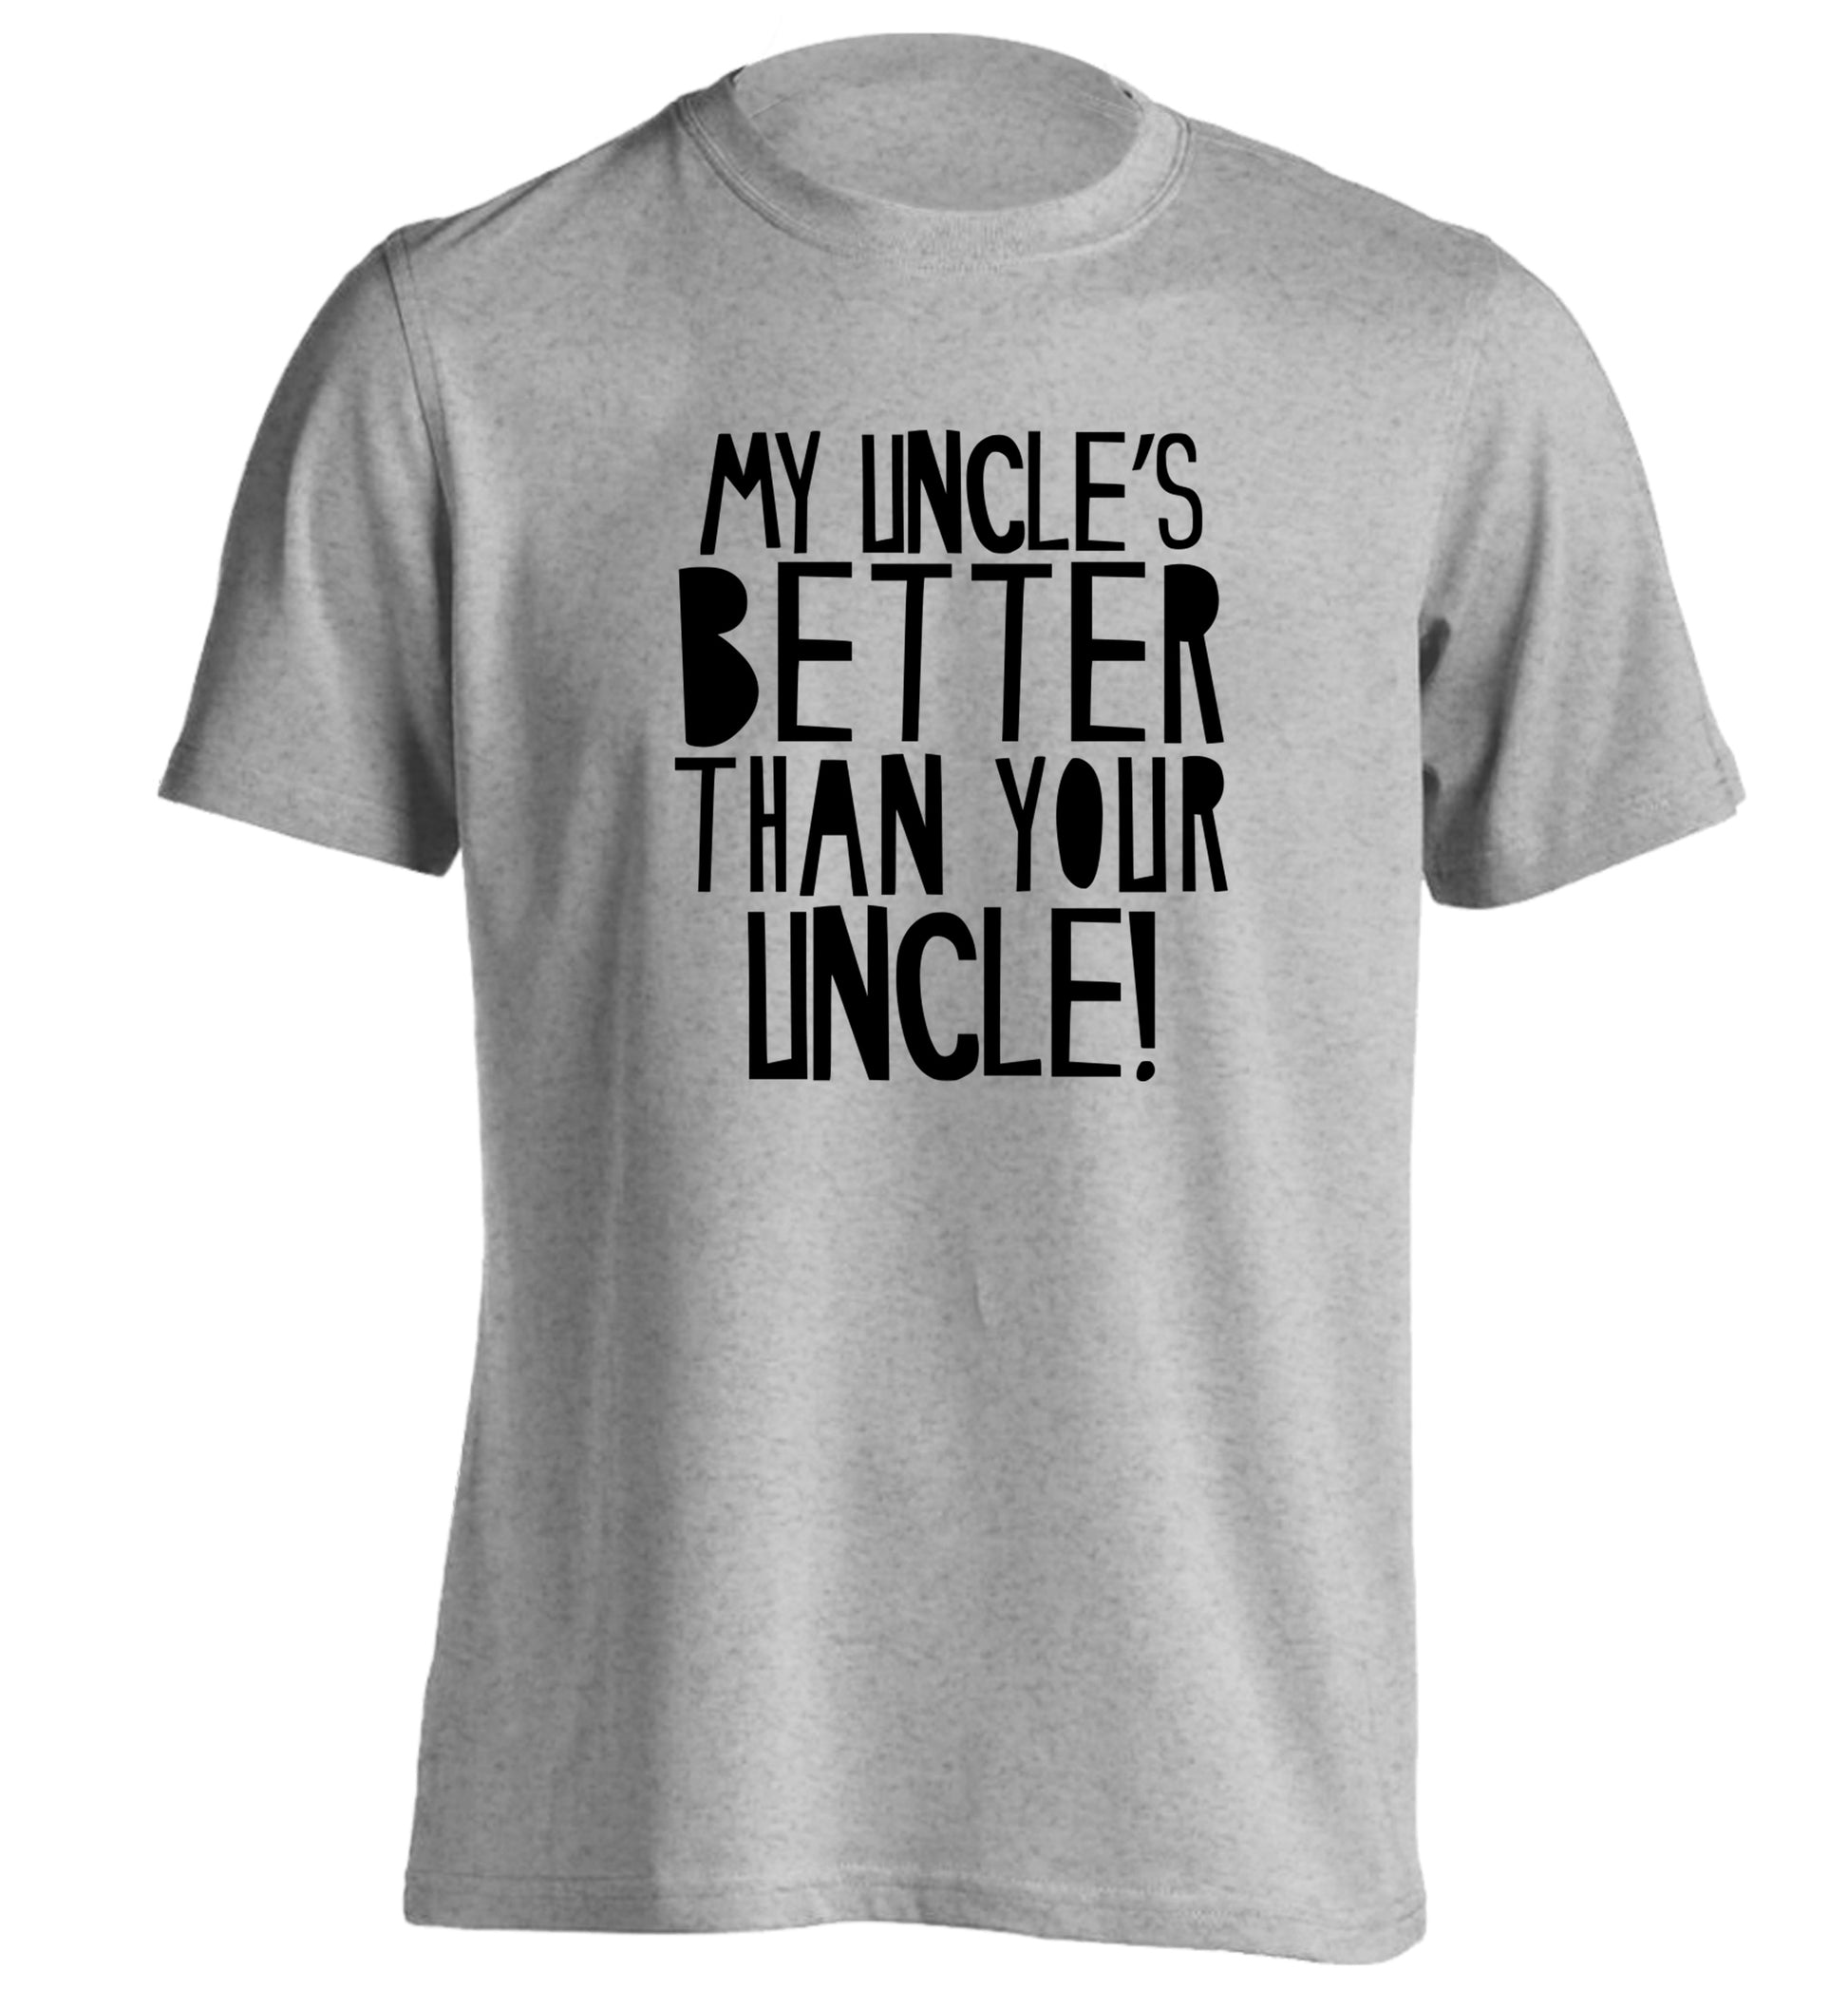 My uncles better than your uncle adults unisex grey Tshirt 2XL